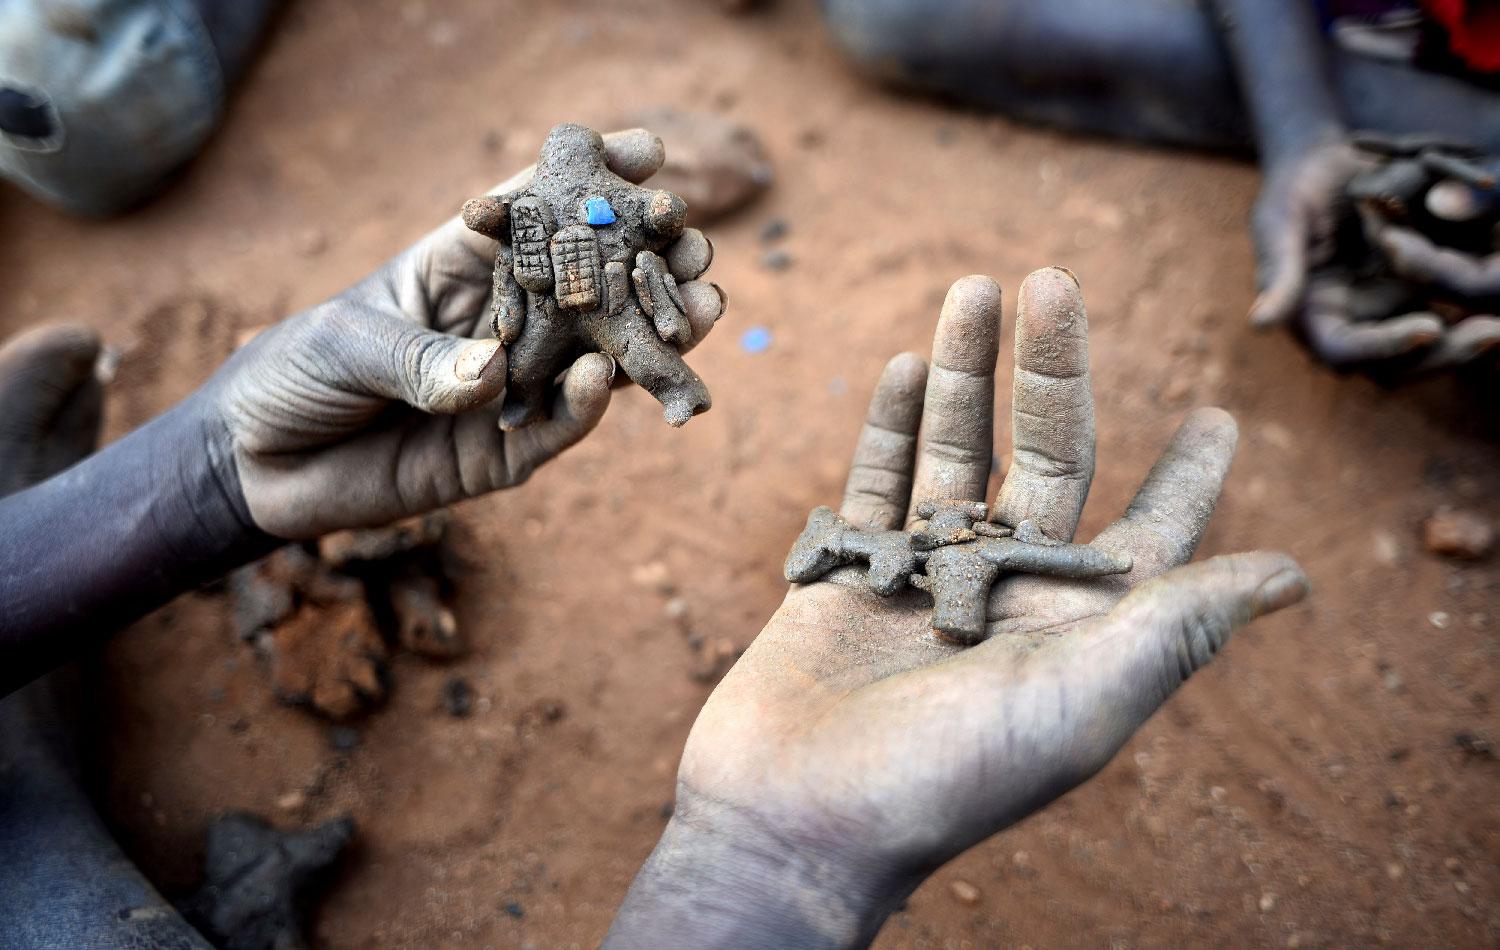 Displaced child holds clay model toys of a peacekeeper and a rifle in Juba, South Sudan.